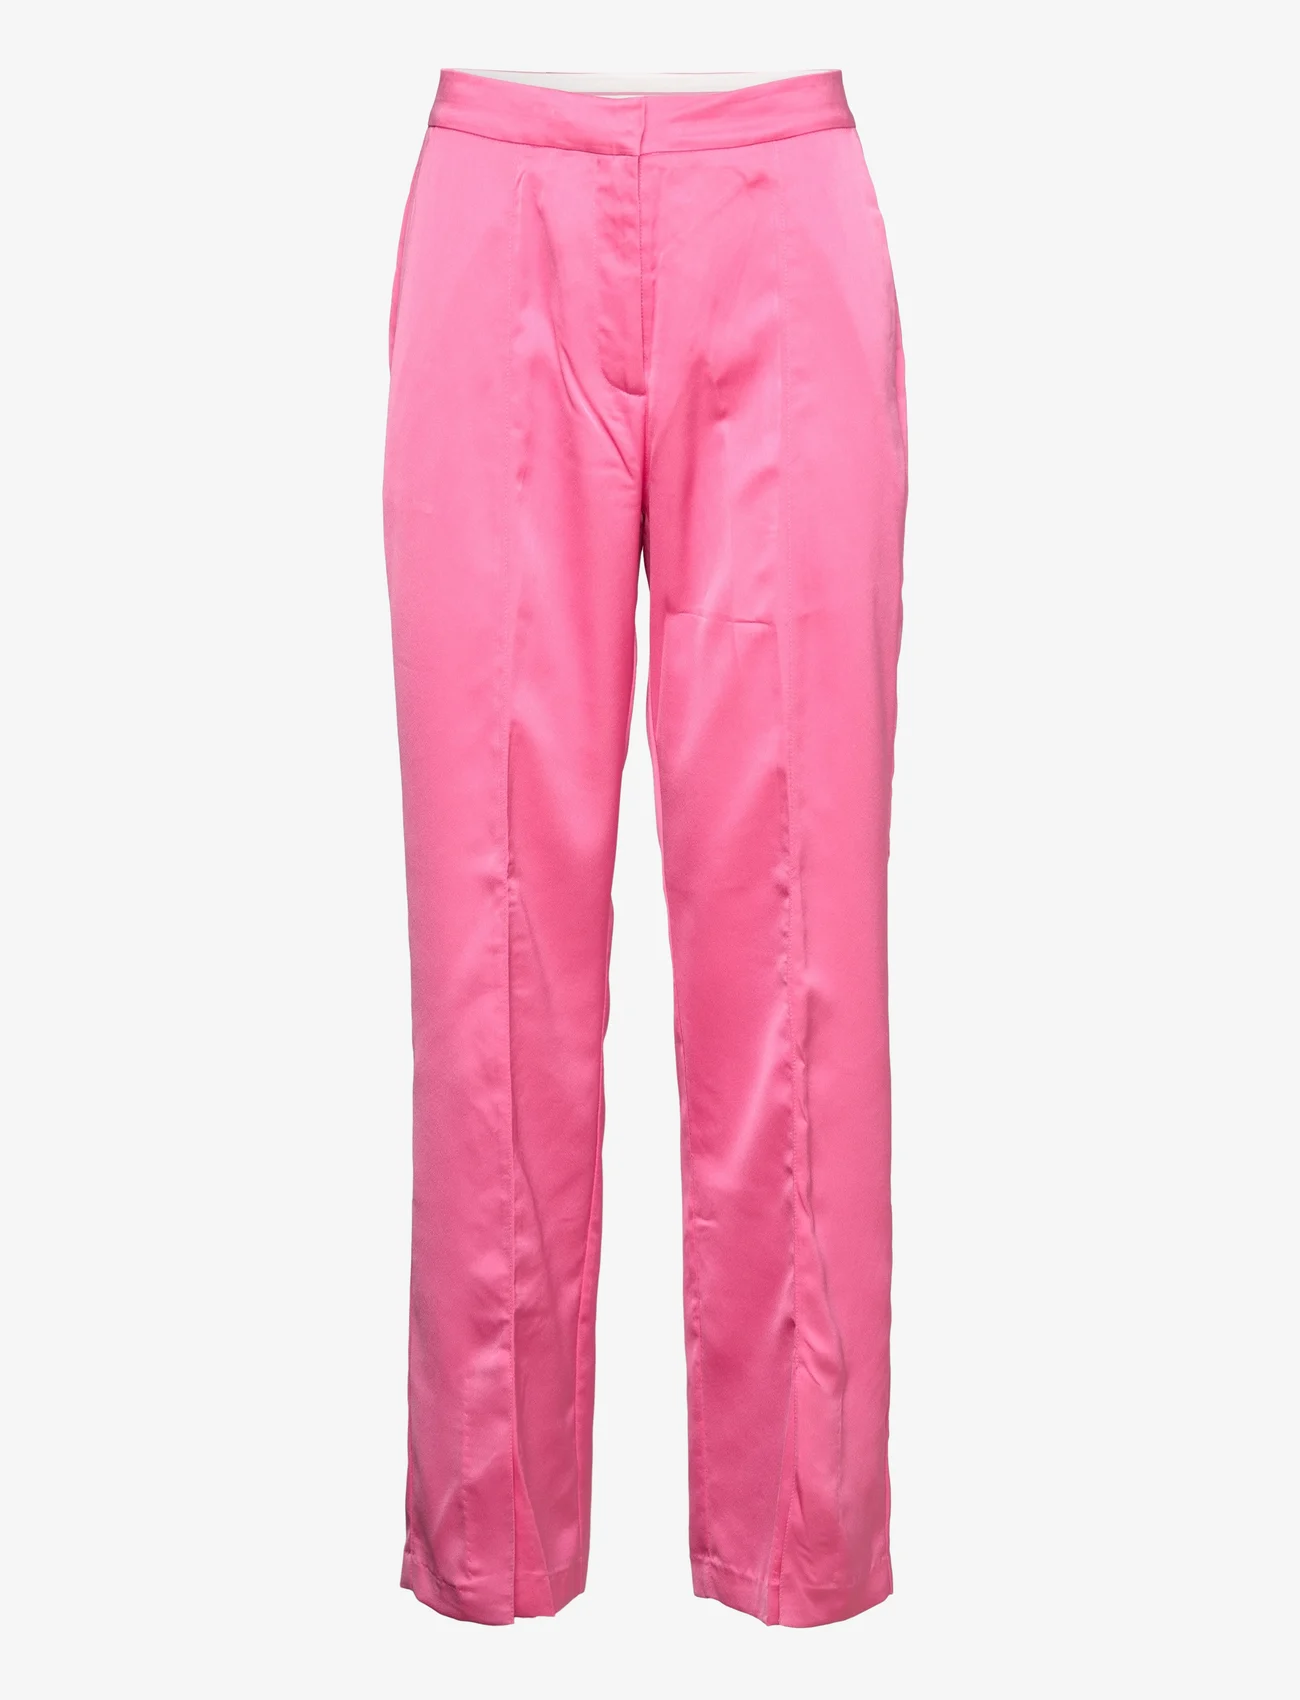 Cras - Samycras Pants - party wear at outlet prices - aurora pink - 0